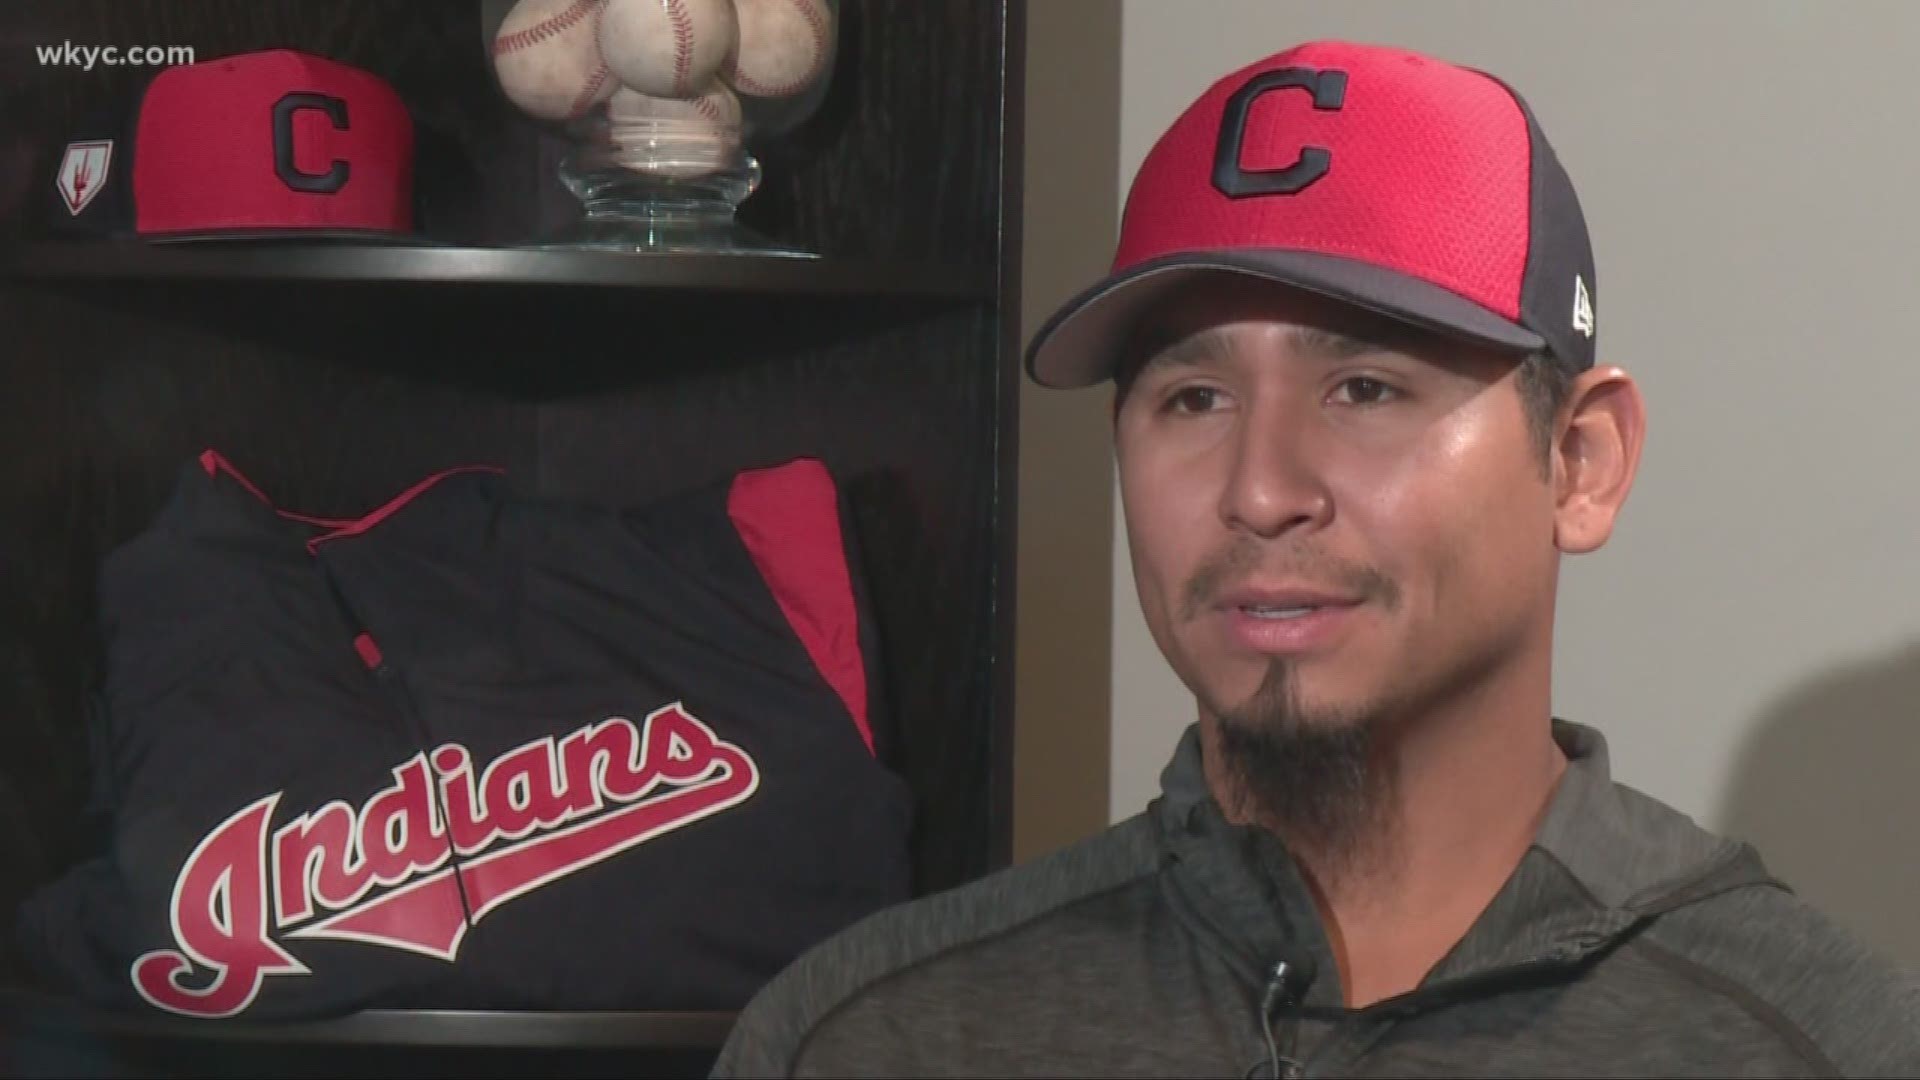 Cleveland Indians pitcher Carlos Carrasco joins WKYC's Dave Chudowsky for Beyond the Dugout. The pair discussed teammates, nicknames and who has the best ride.